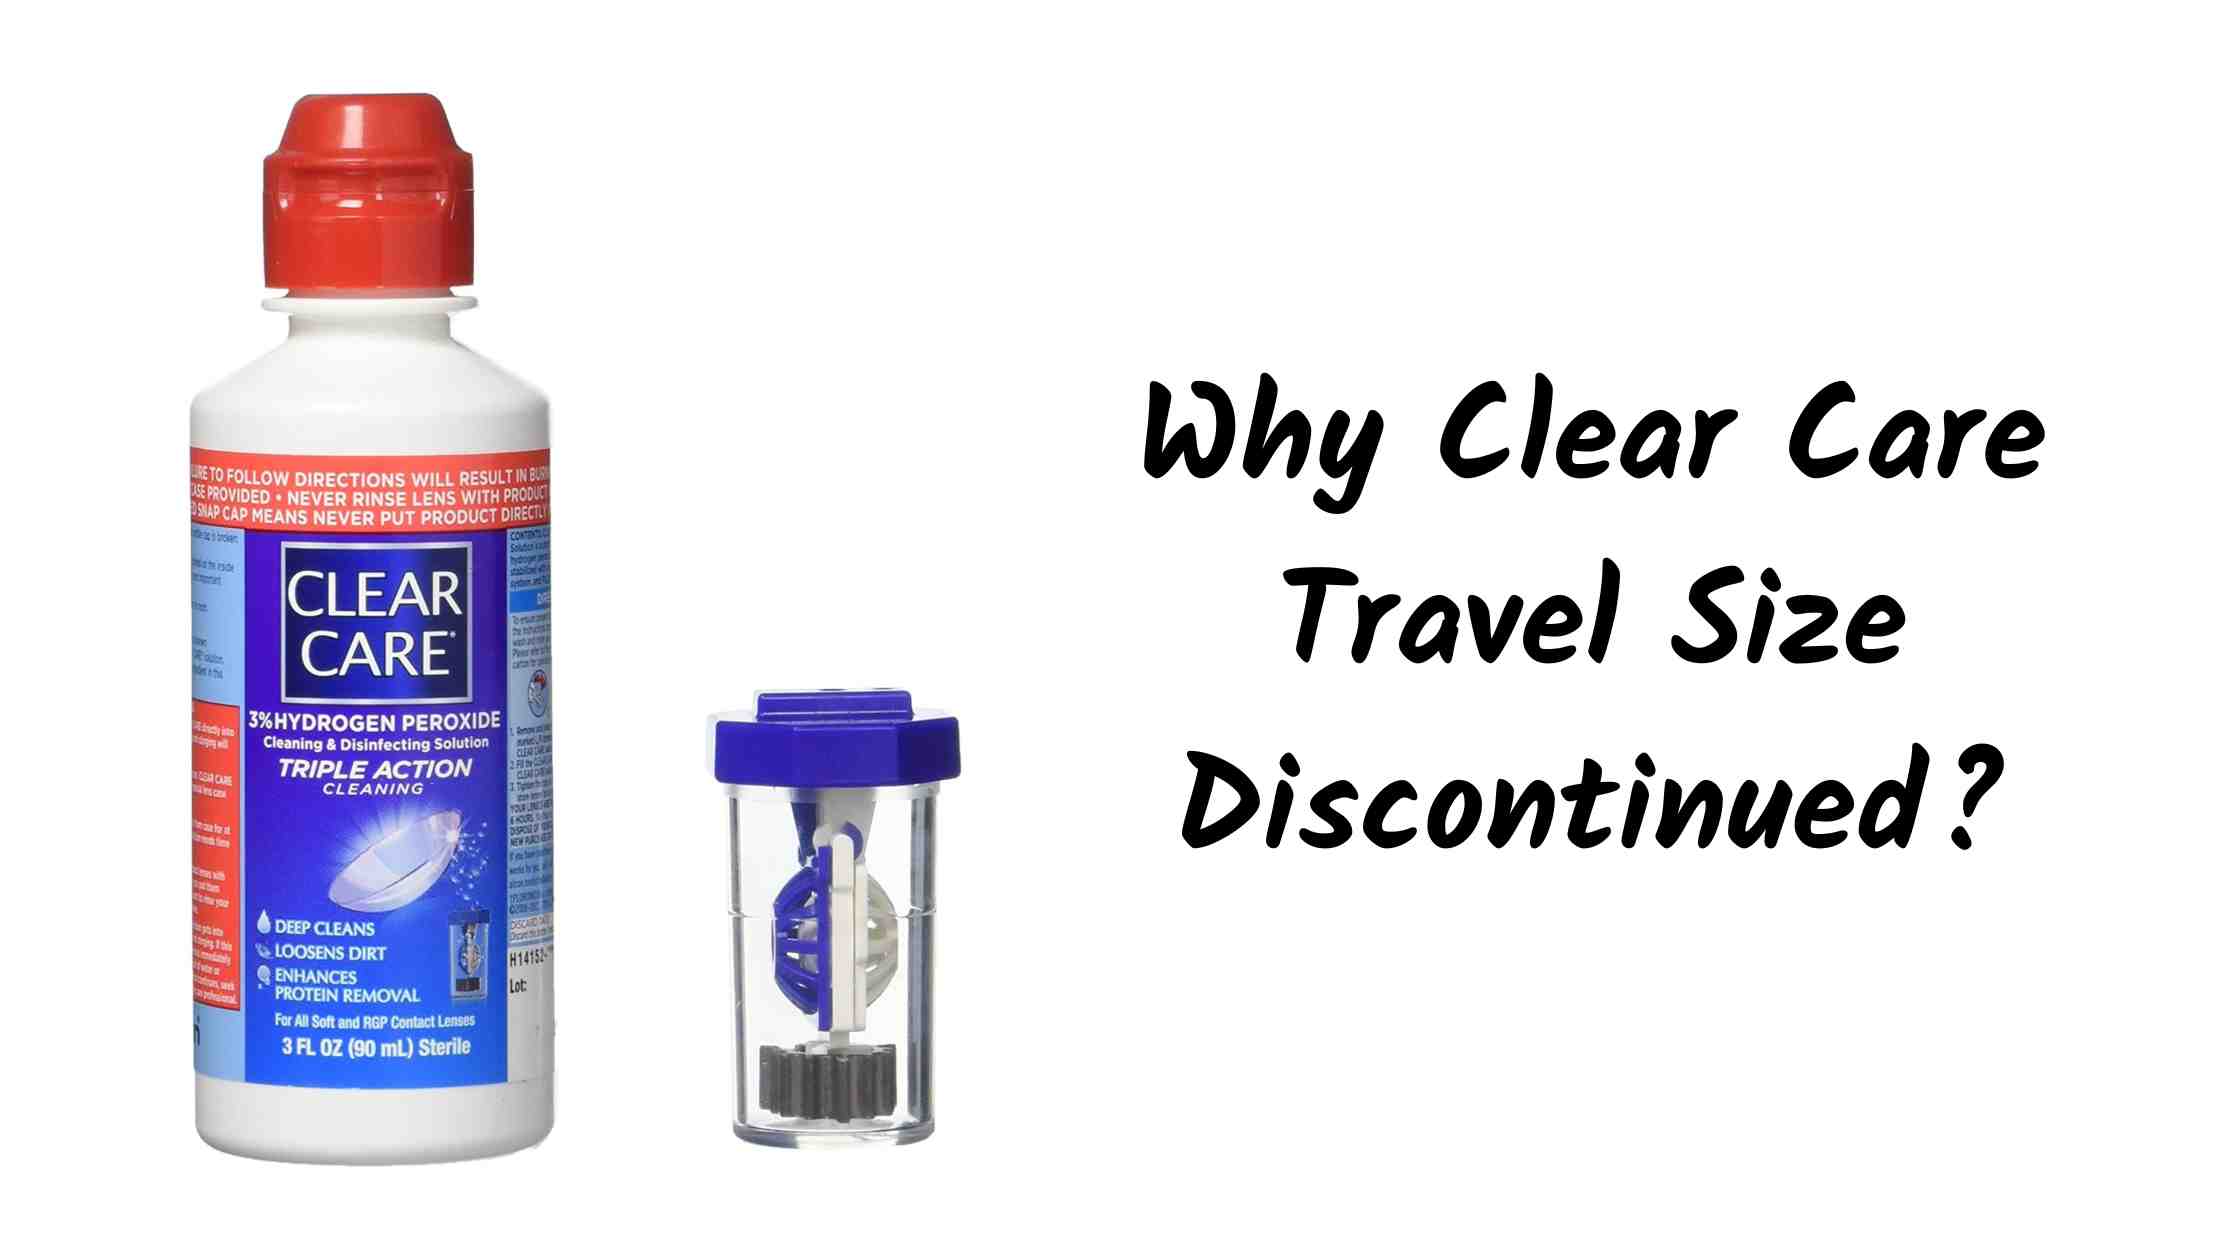 Why Clear Care Travel Size Discontinued - Shortage of 2022